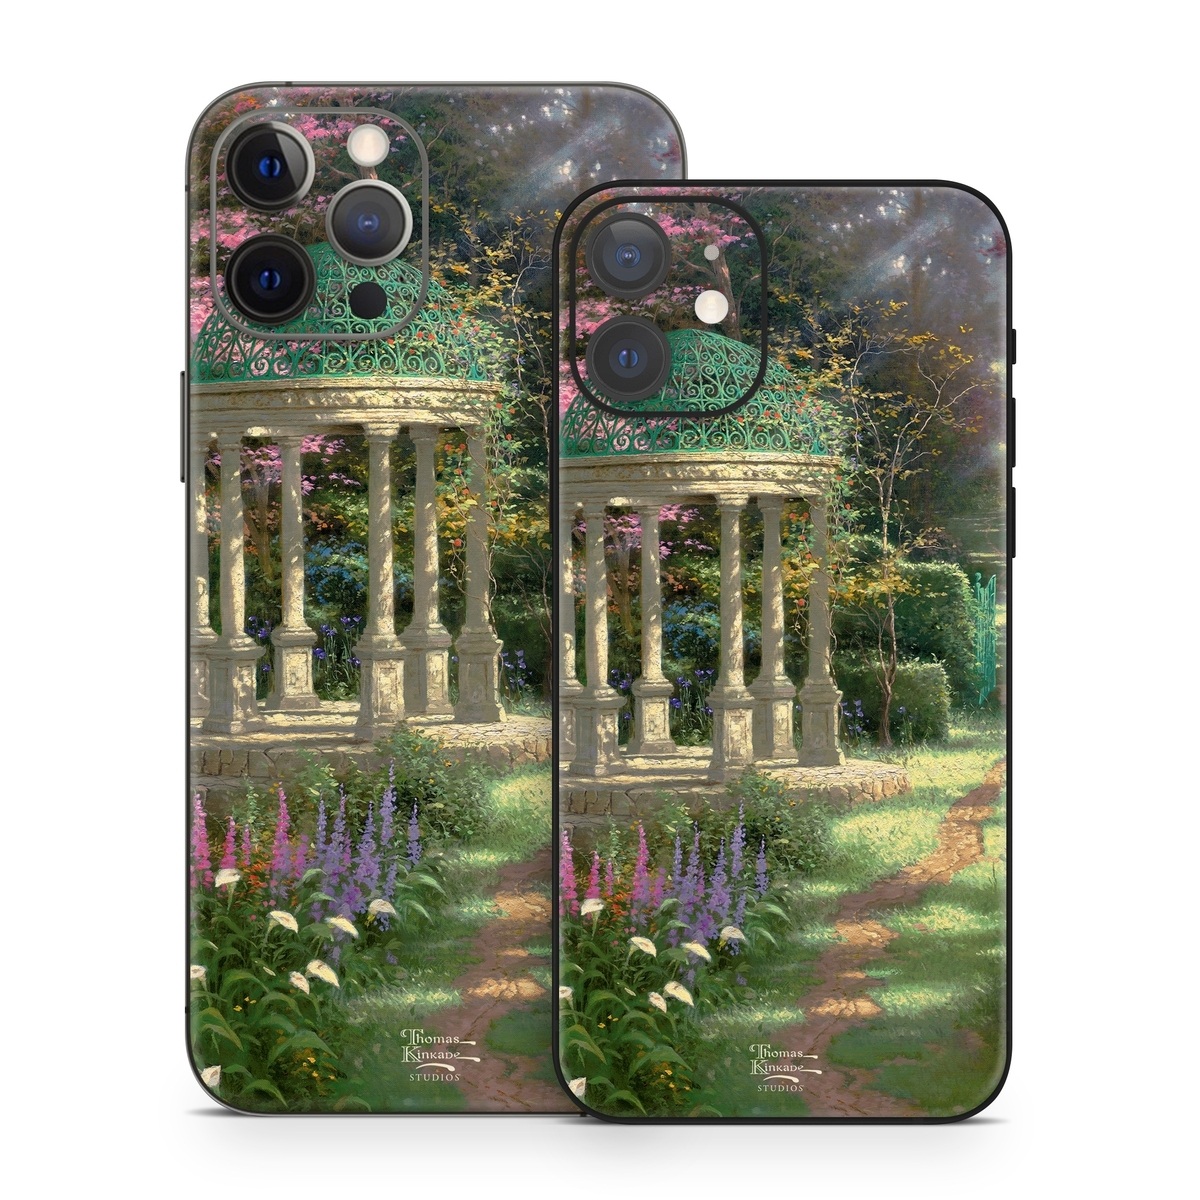 iPhone 12 Series Skin design of Nature, Natural landscape, Tree, Botany, Water, Garden, Gazebo, Spring, Plant, Reflection, with black, gray, green, red, purple colors